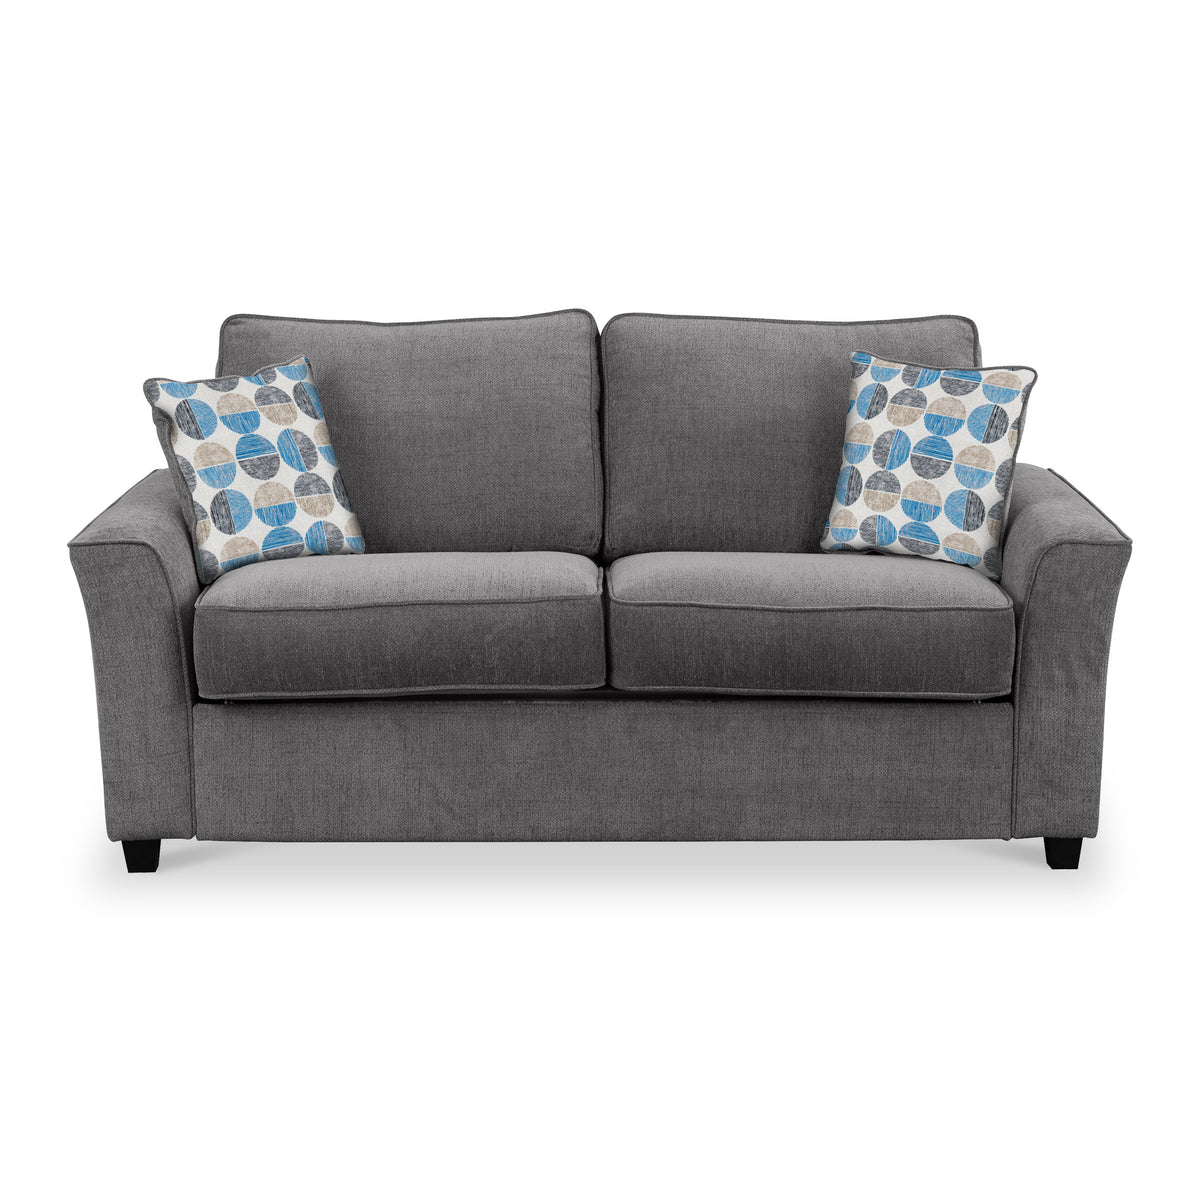 Boston 2 Seater Sofabed in Charcoal with Rufus Blue Cushions by Roseland Furniture